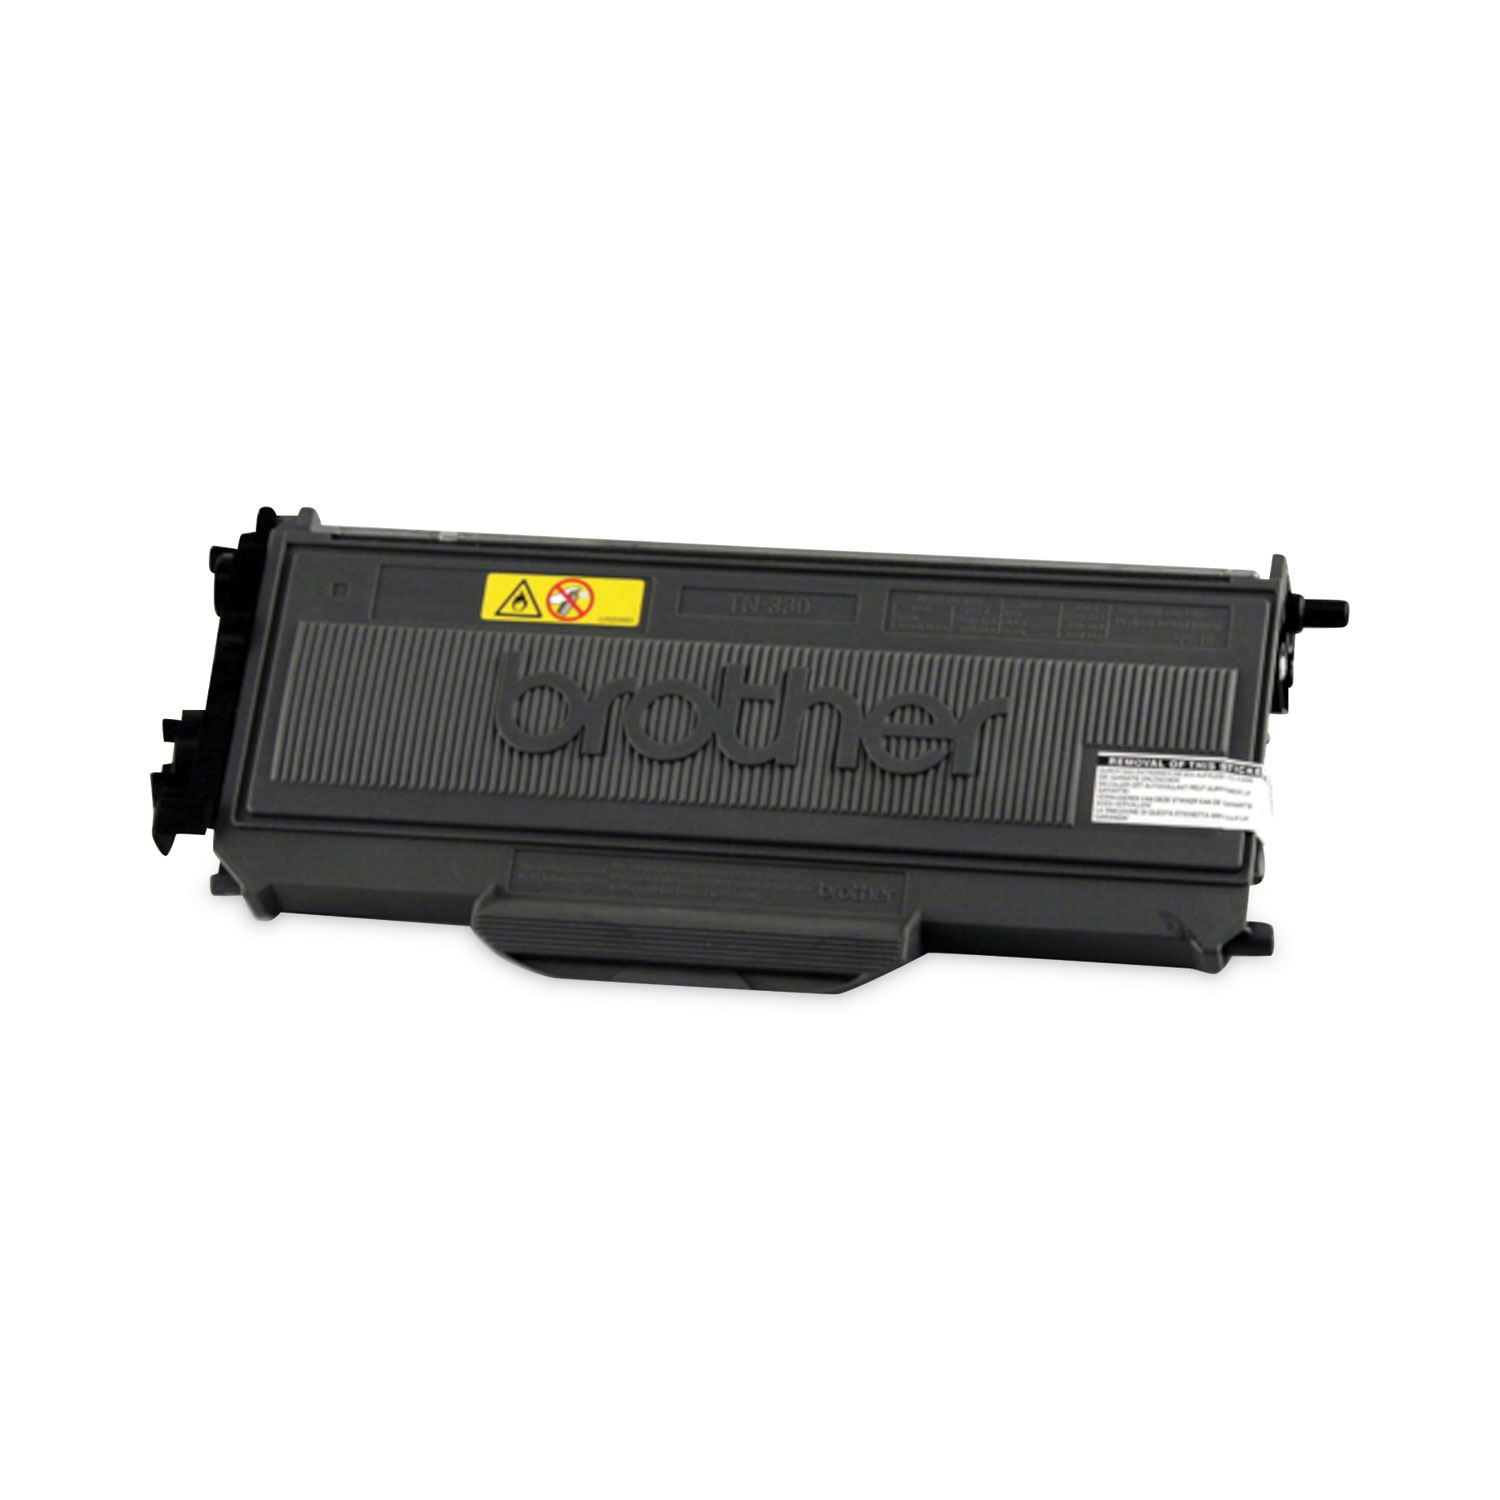 TN330 Toner, 1,500 Page-Yield, Black - BOSS Office and Computer Products